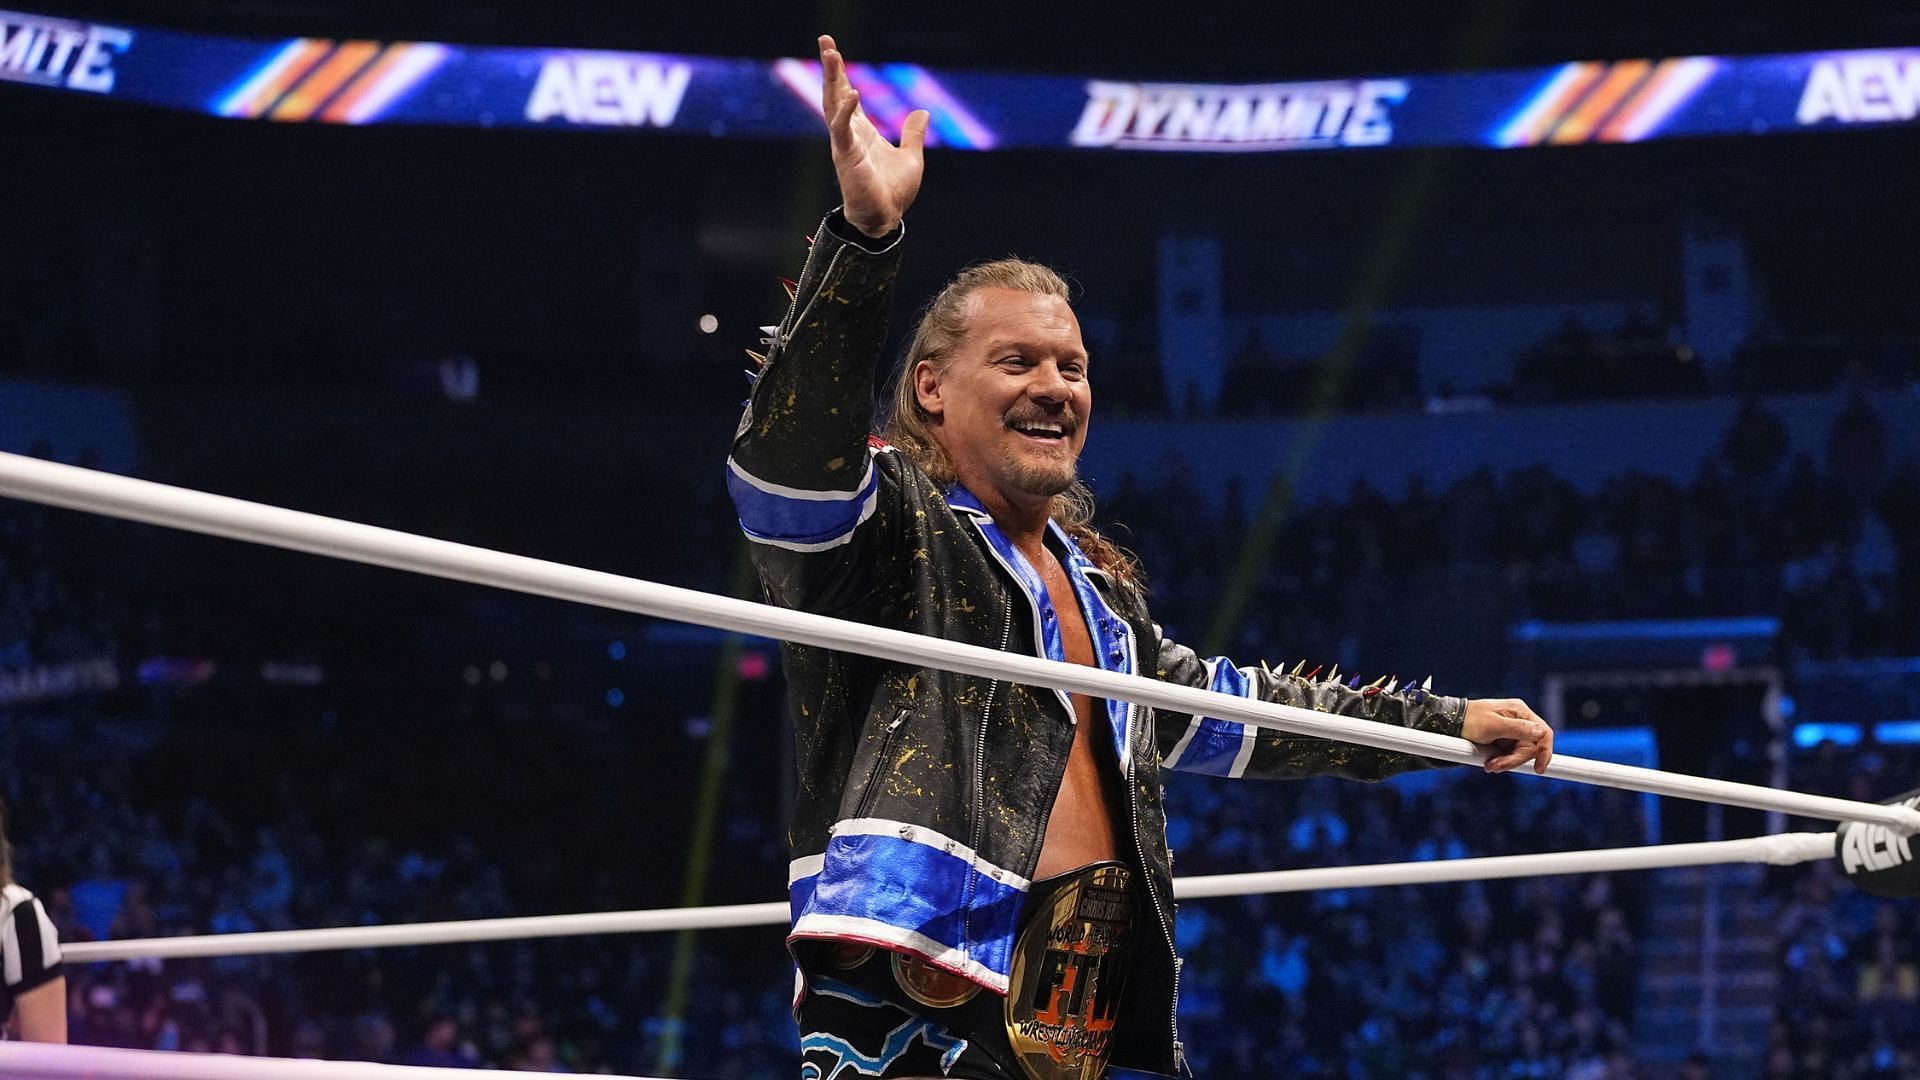 Chris Jericho is the current FTW Champion [Photo courtesy of AEW